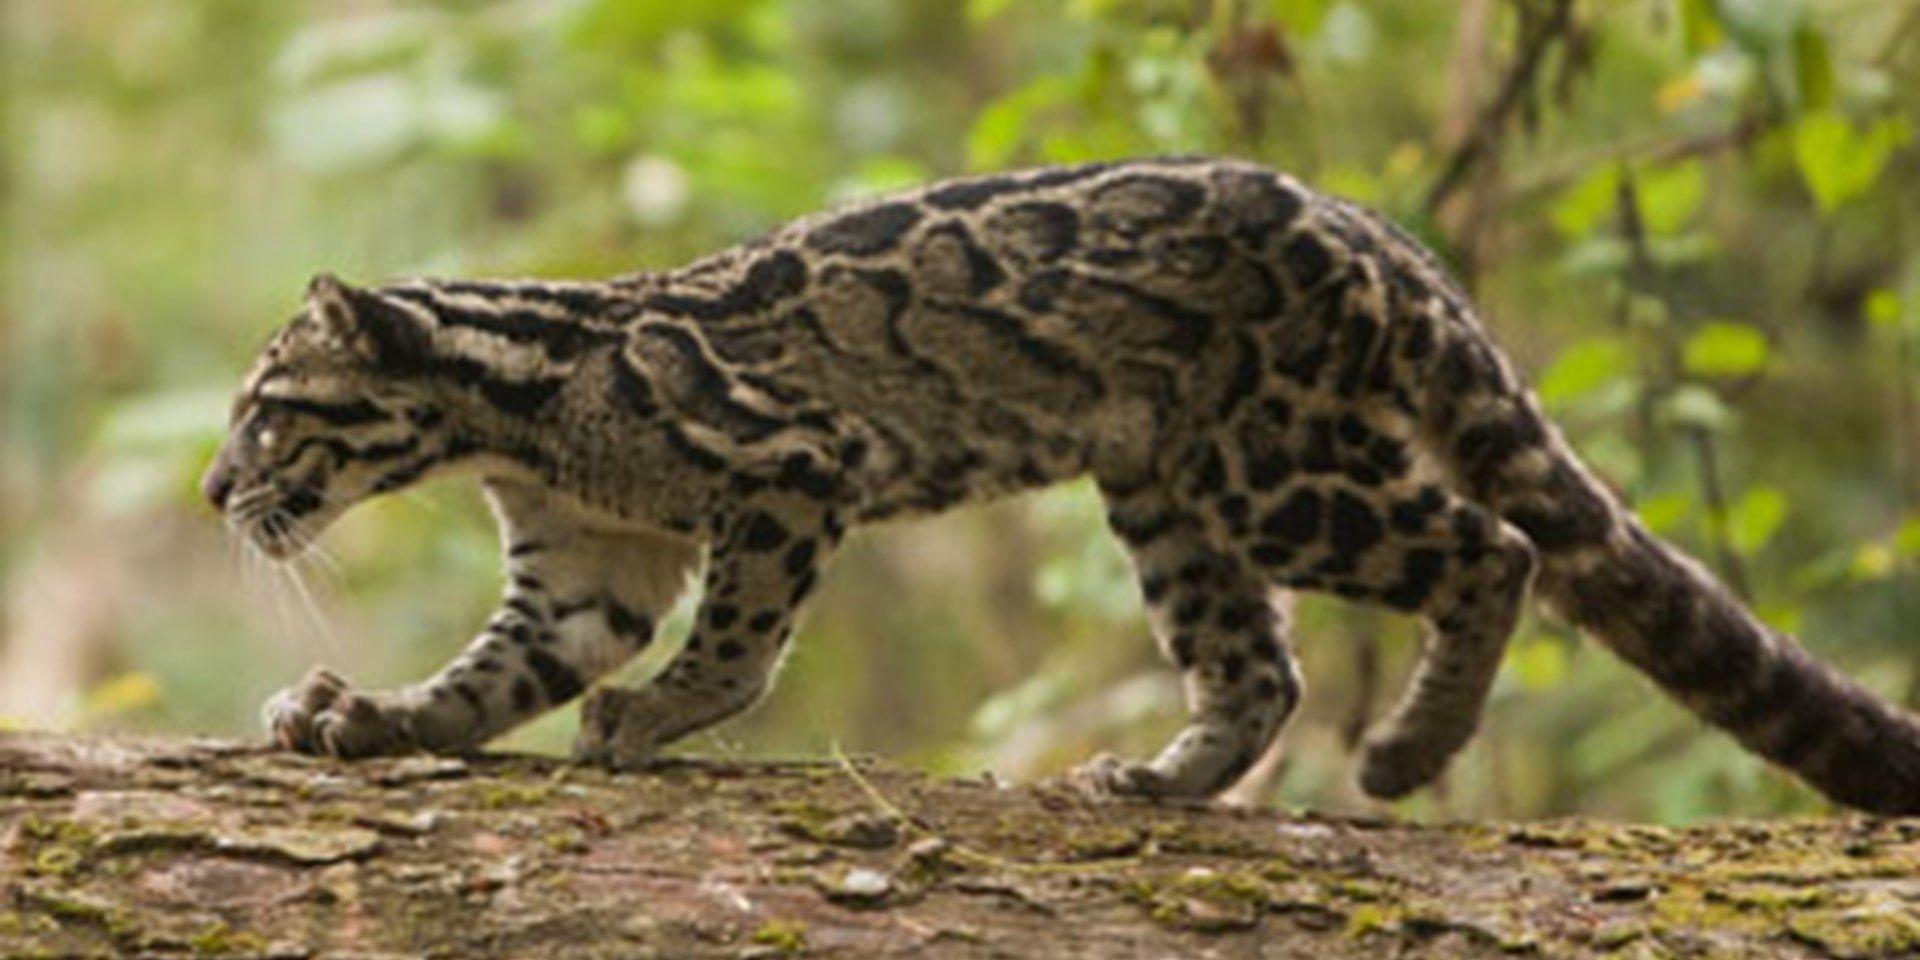 Clouded Leopard wallpaper, Animal, HQ Clouded Leopard picture